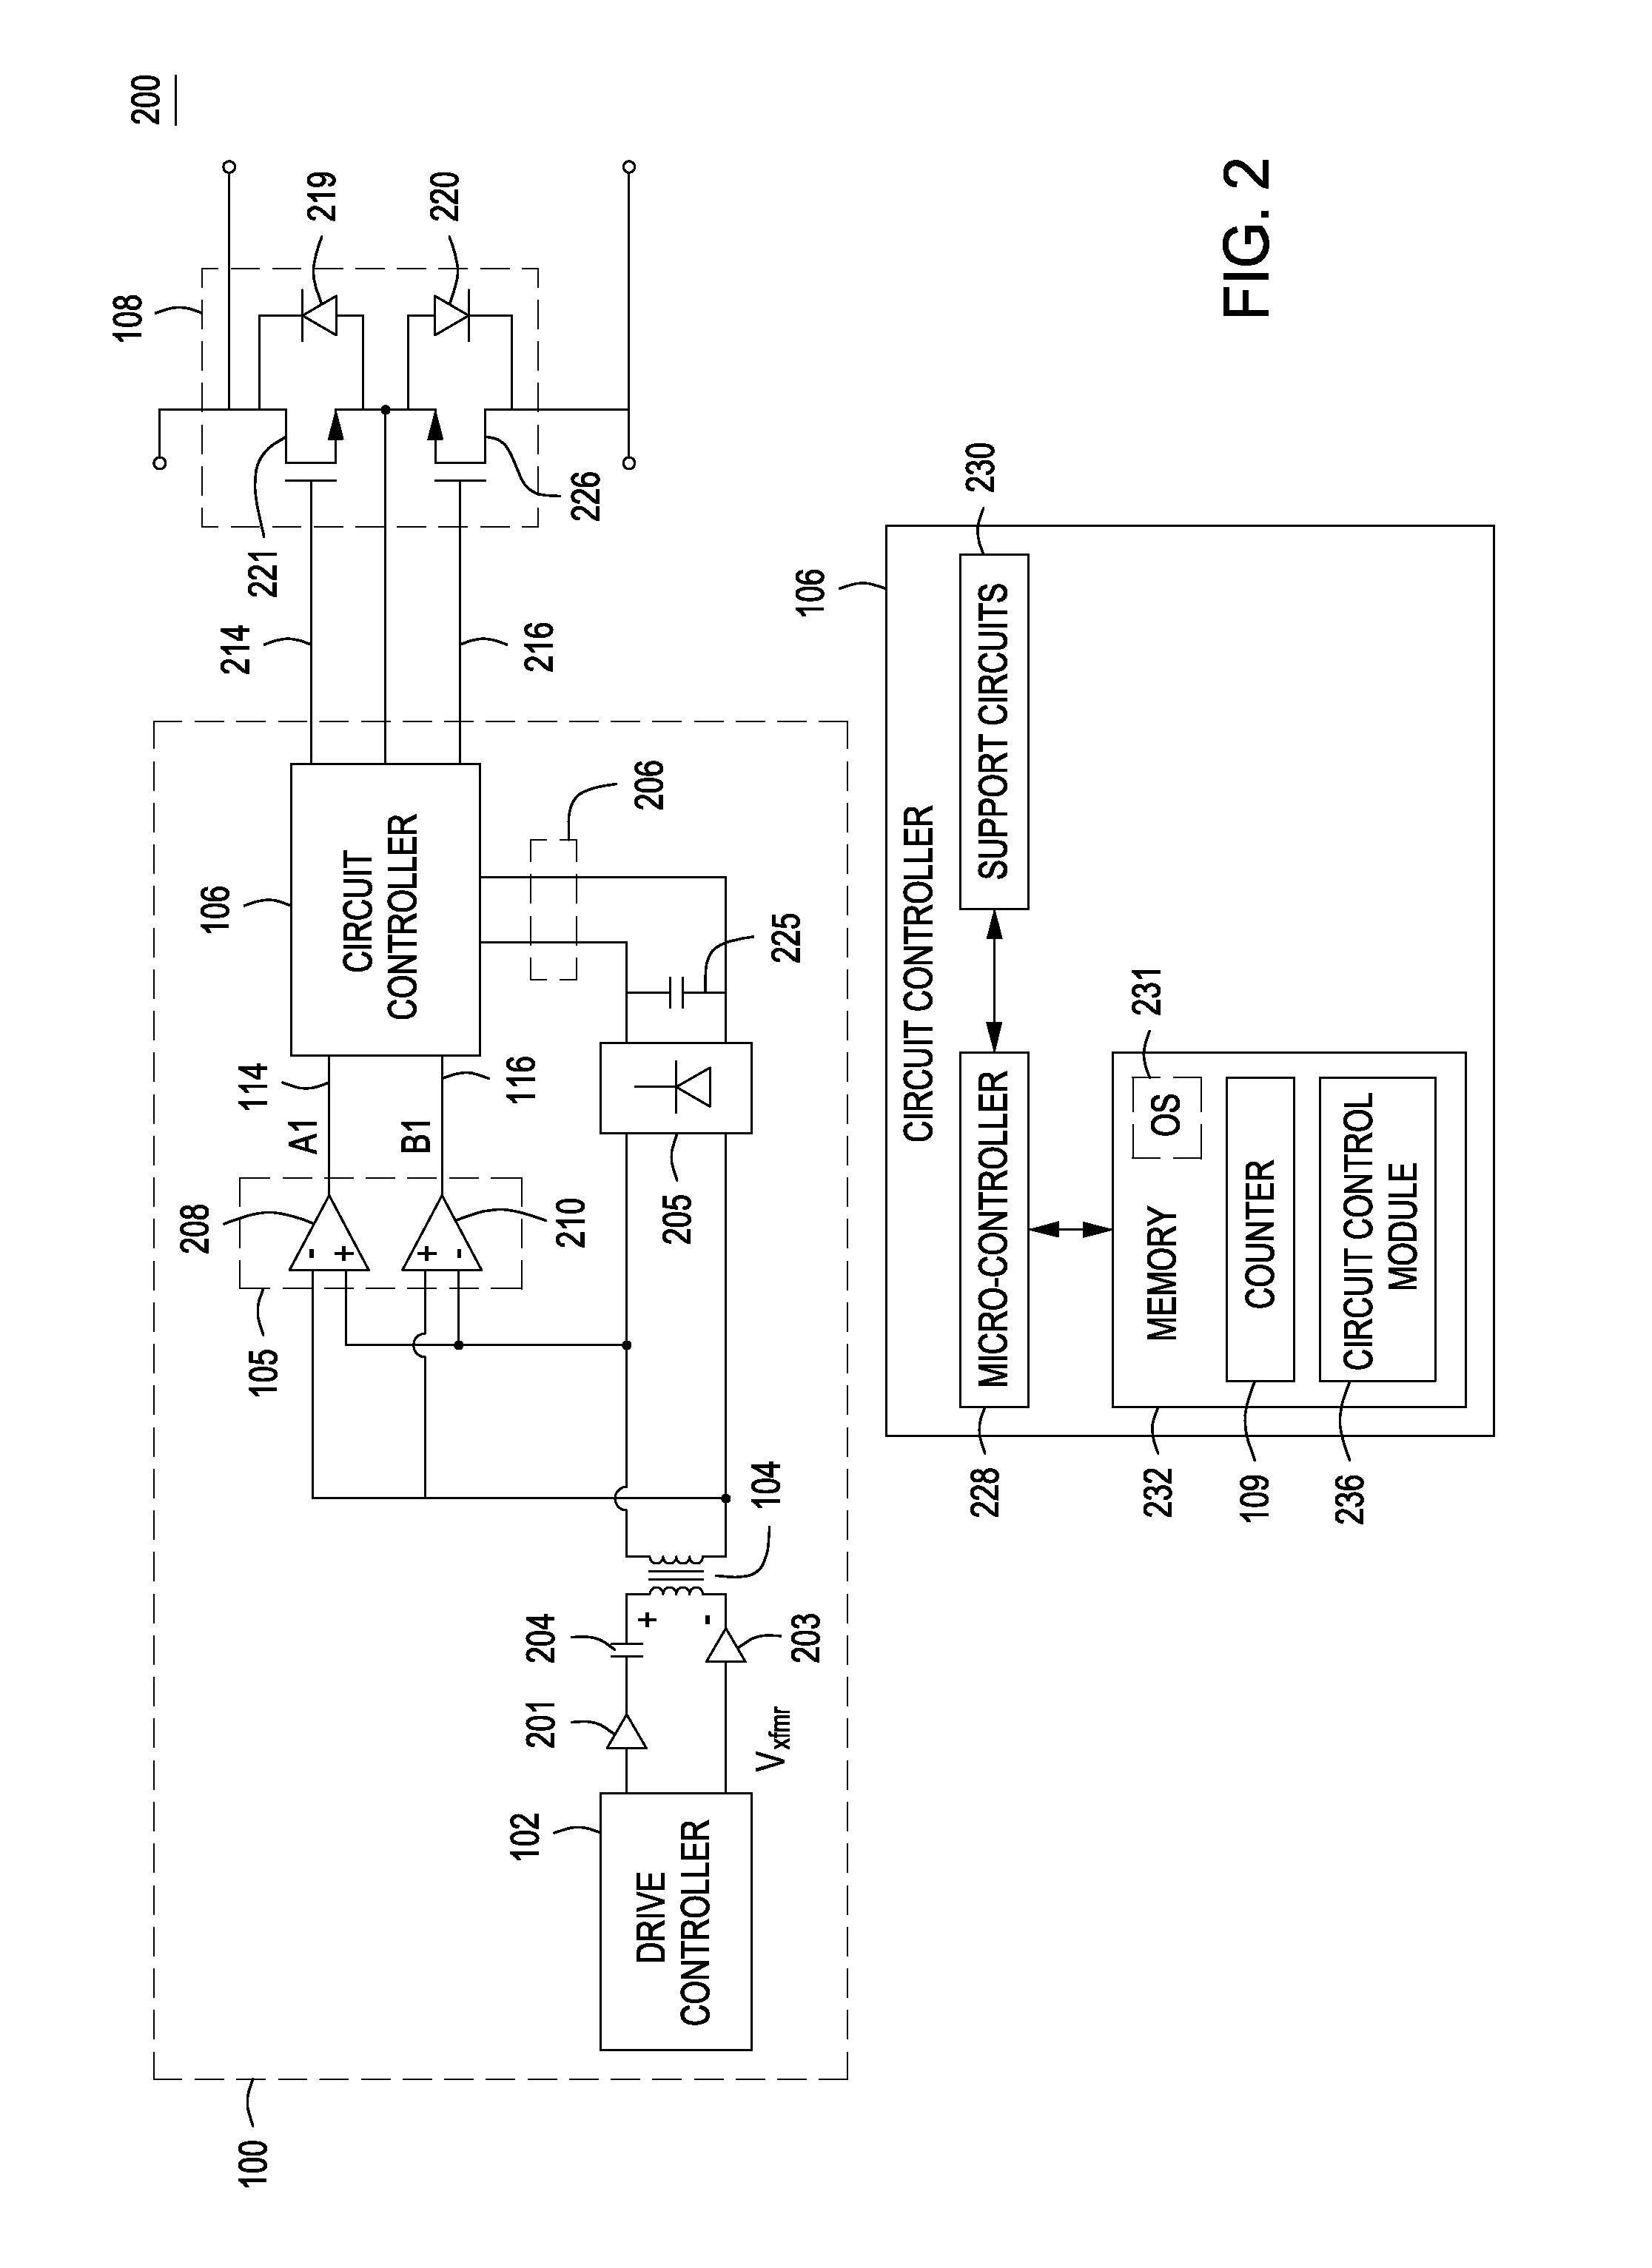 Method and apparatus for transmitting combined power, control and data through an isolation barrier